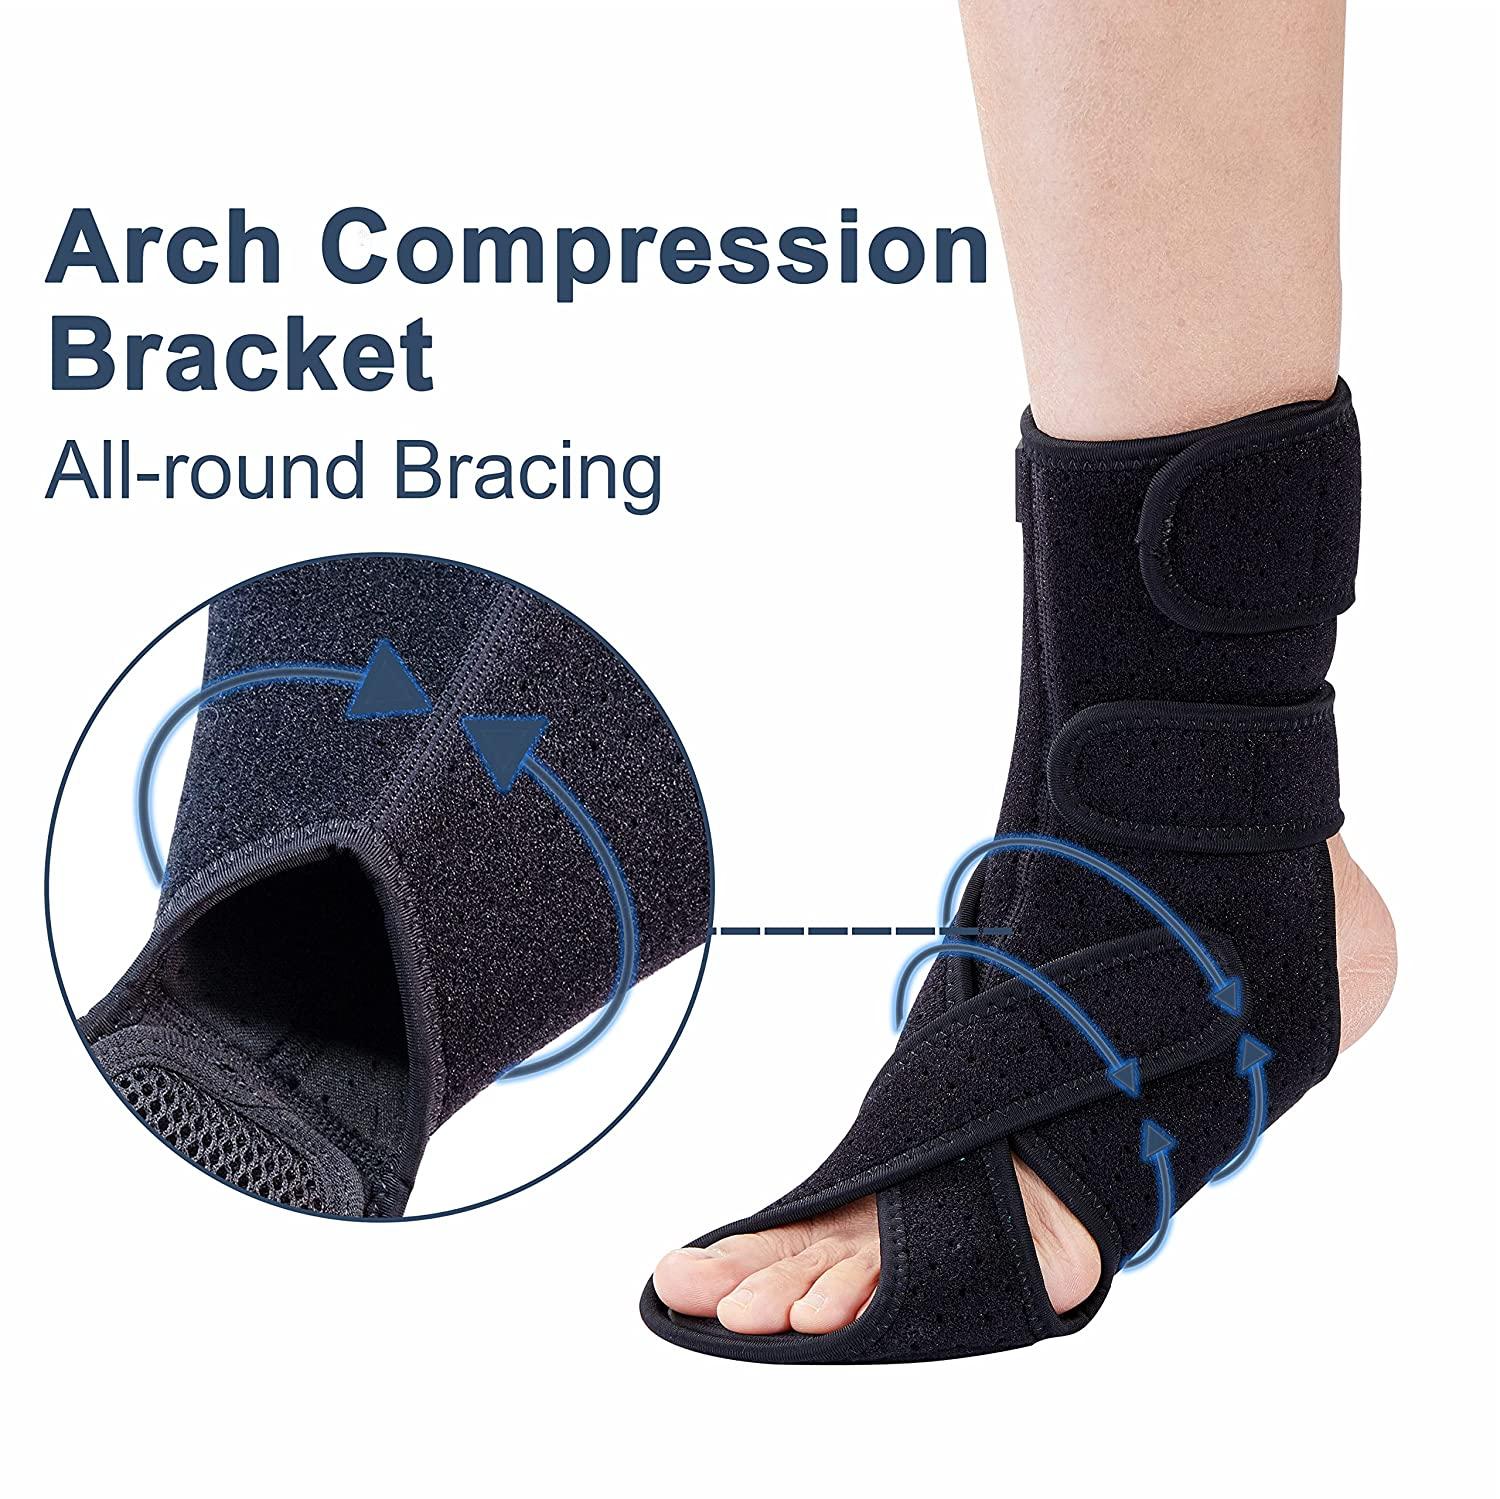 SYREBO Foot Drop Brace Medical Foot Up Ankle Foot Orthosis Support wit